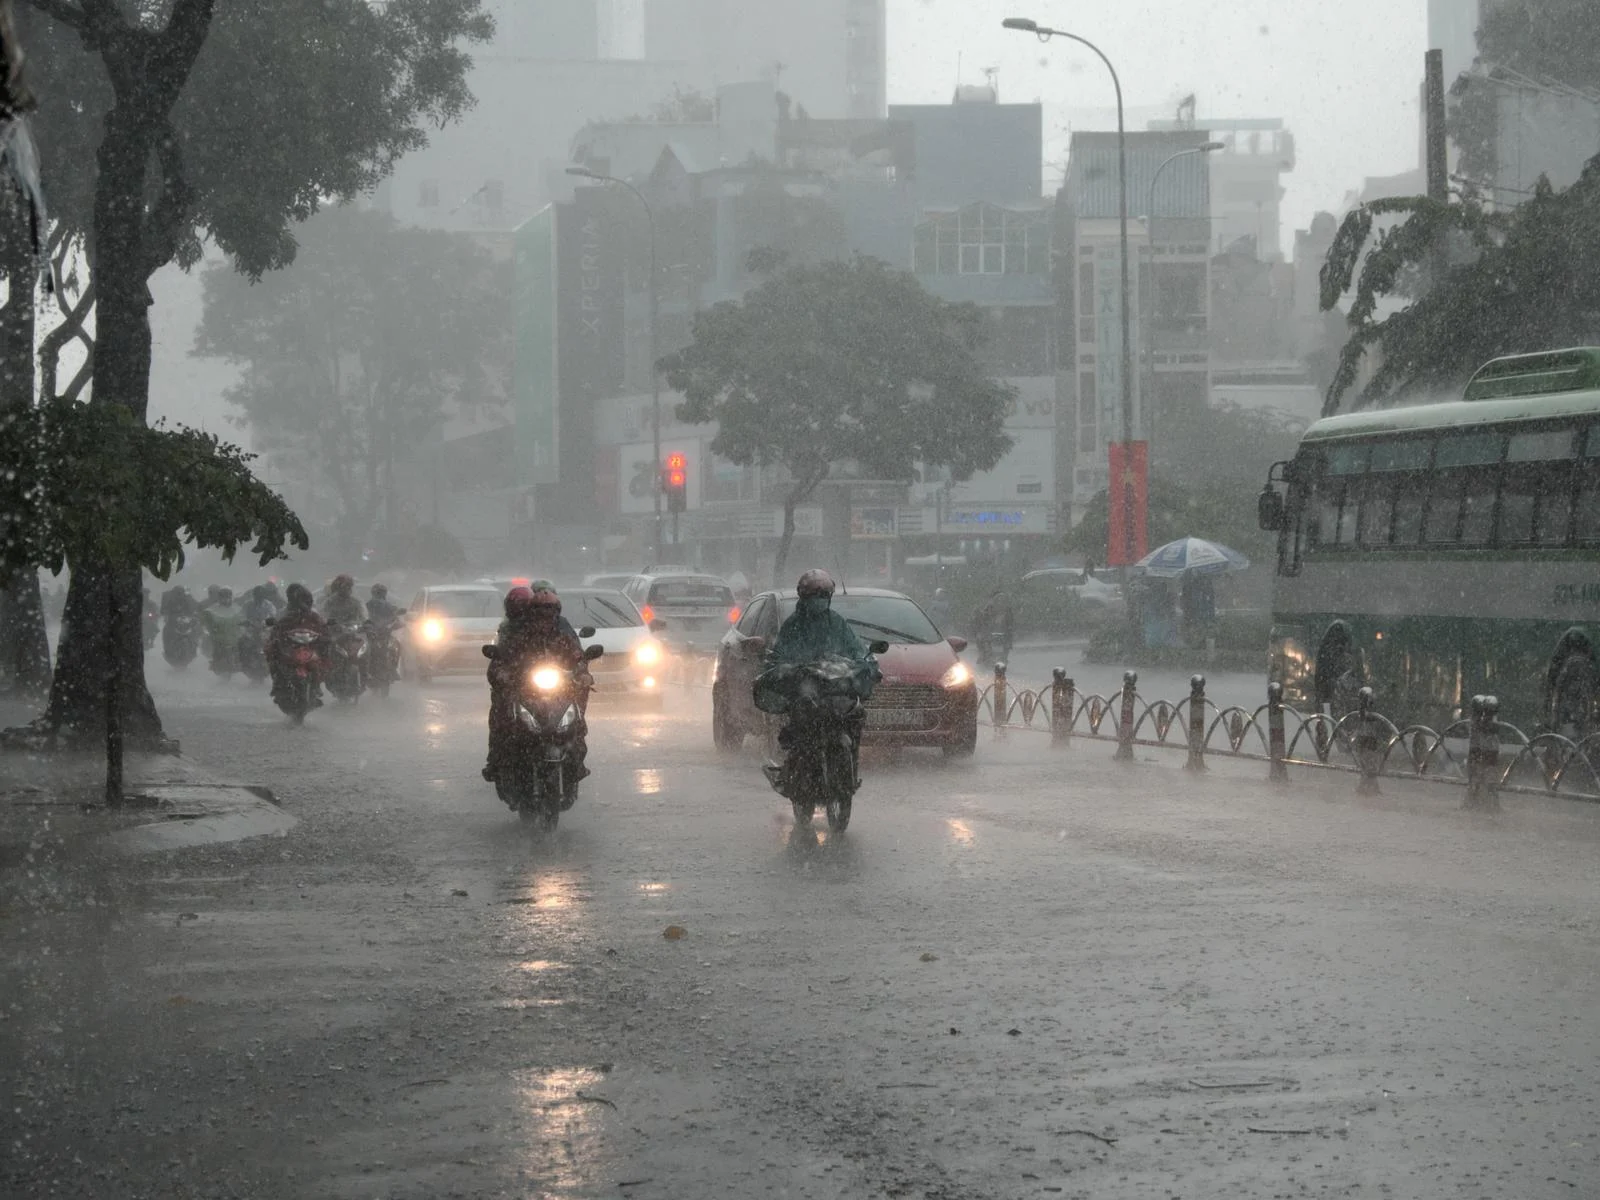 Ho Chi Minh during the worst time to visit Vietnam with rain pouring on people on motorcycles